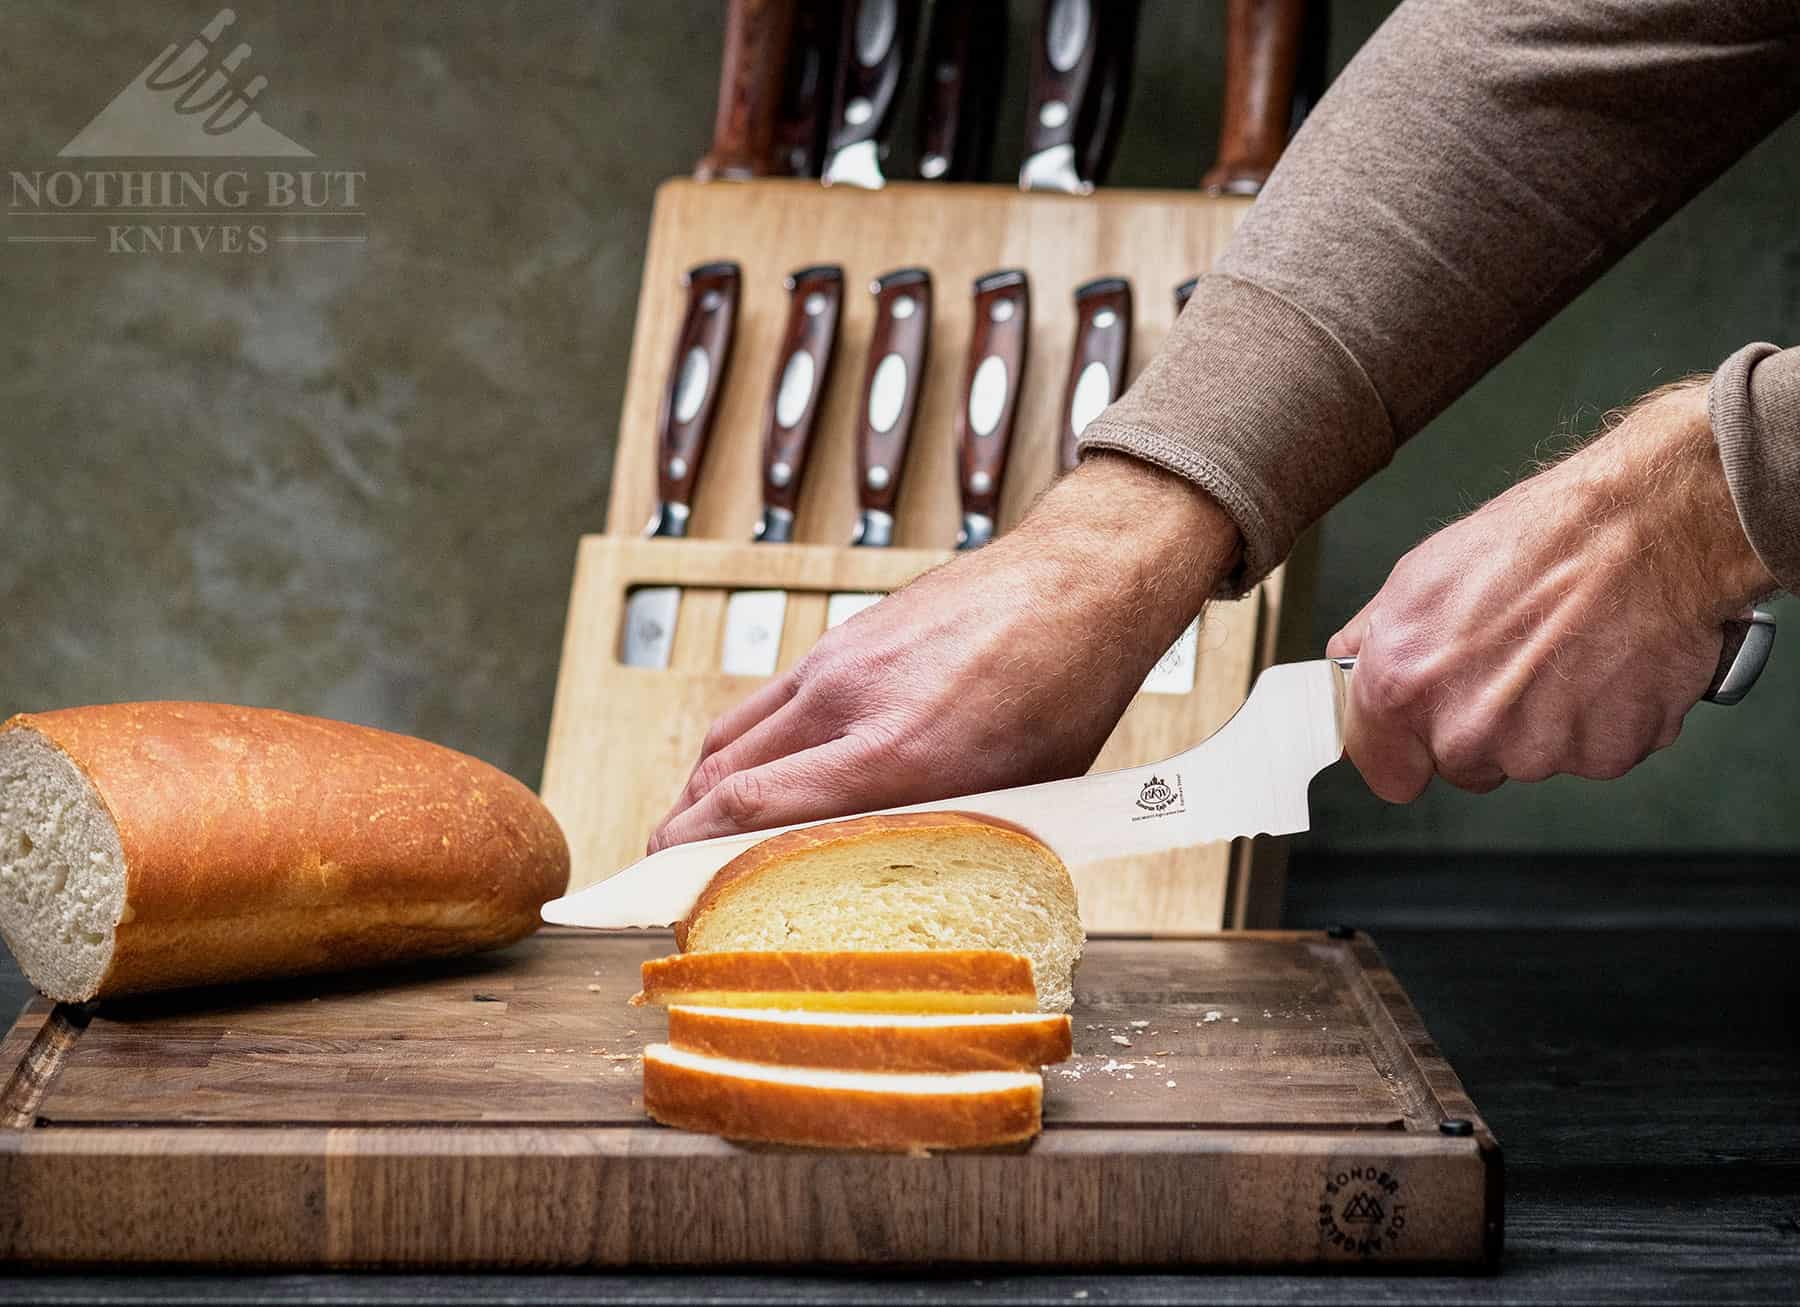 The off-set bread knife that is included in this set is an almost effortless bread slicer. 